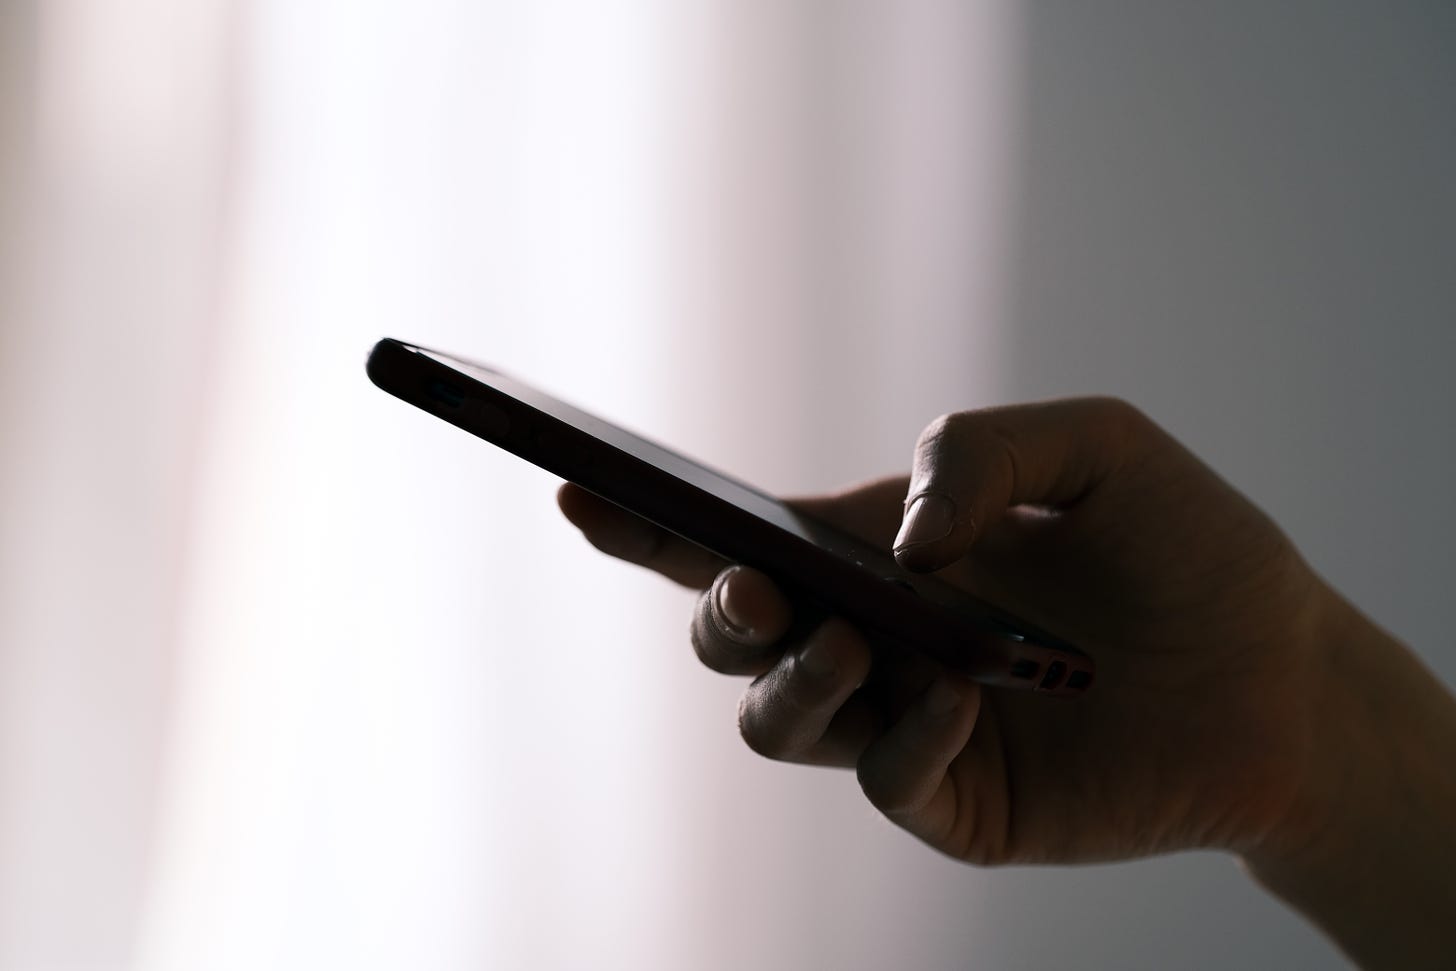 The silhouette of a person's hand texting on a black phone. The background is a white curtain with light coming through.